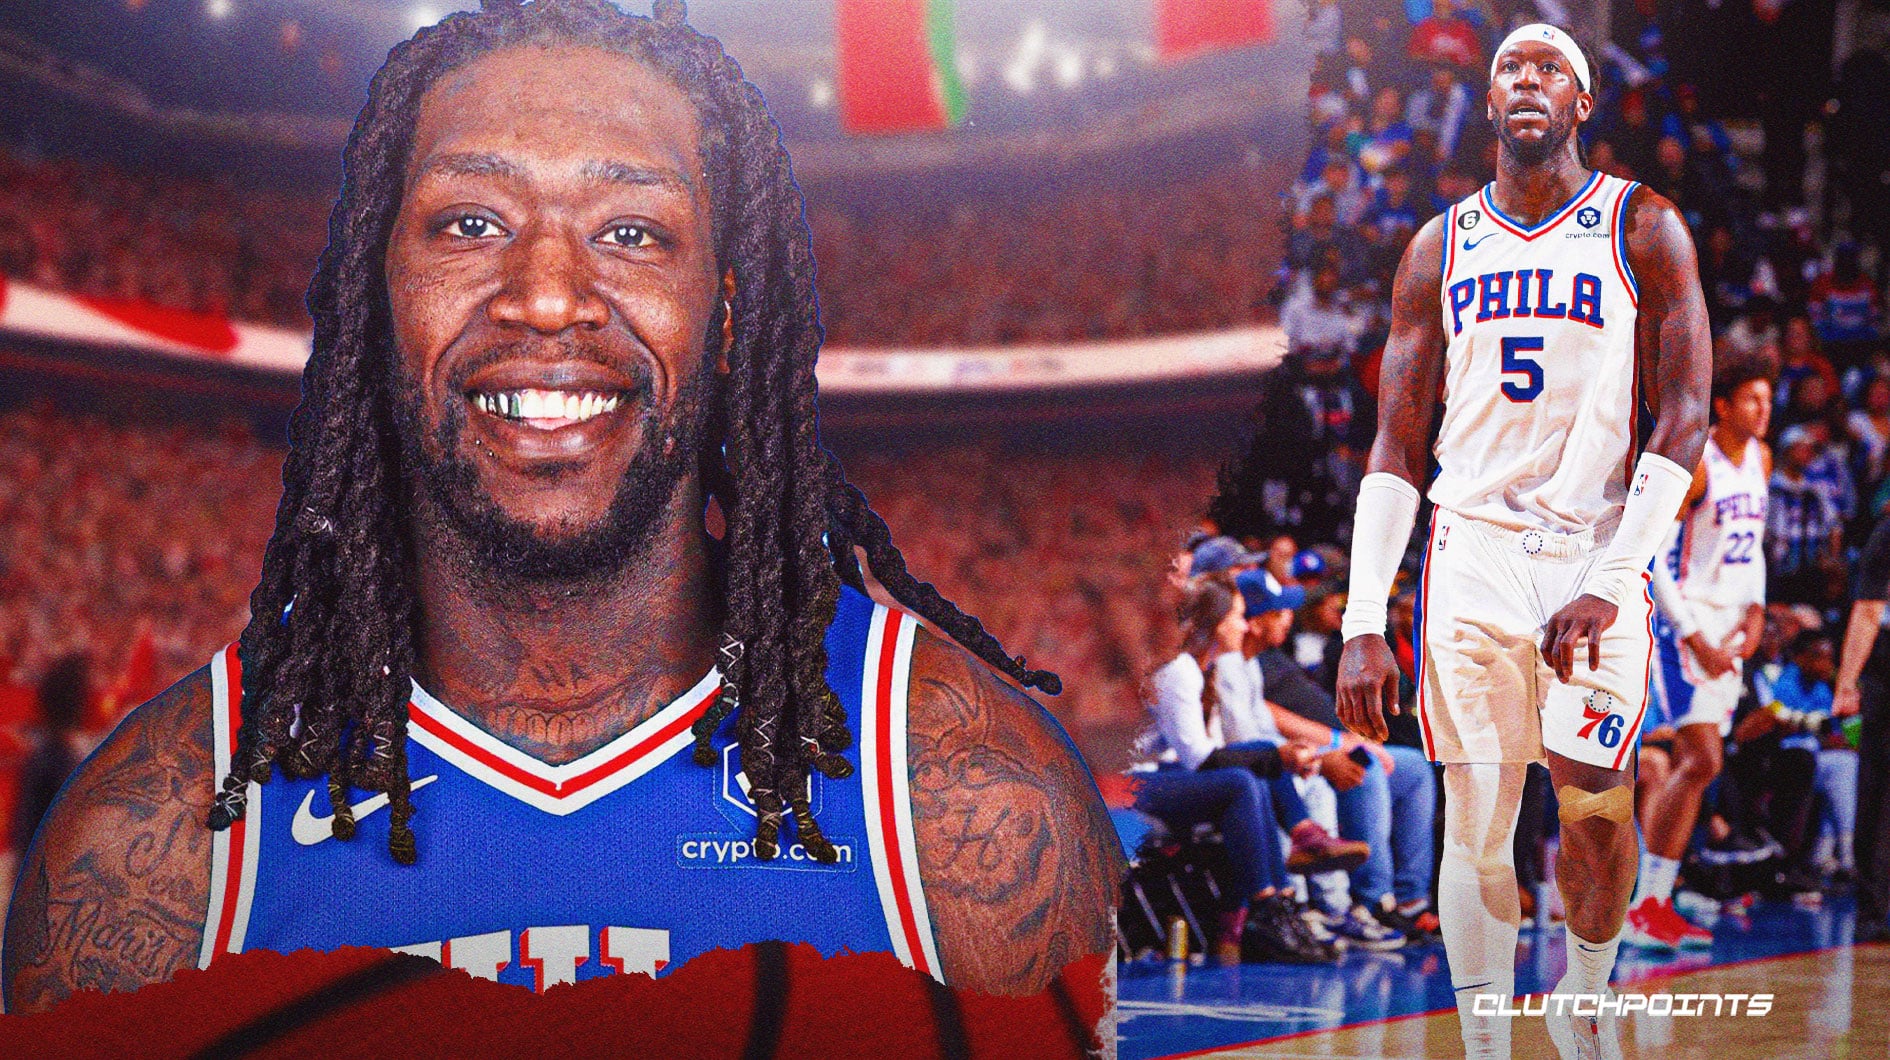 NBA Rookie Week: Montrezl Harrell shows promise for the future